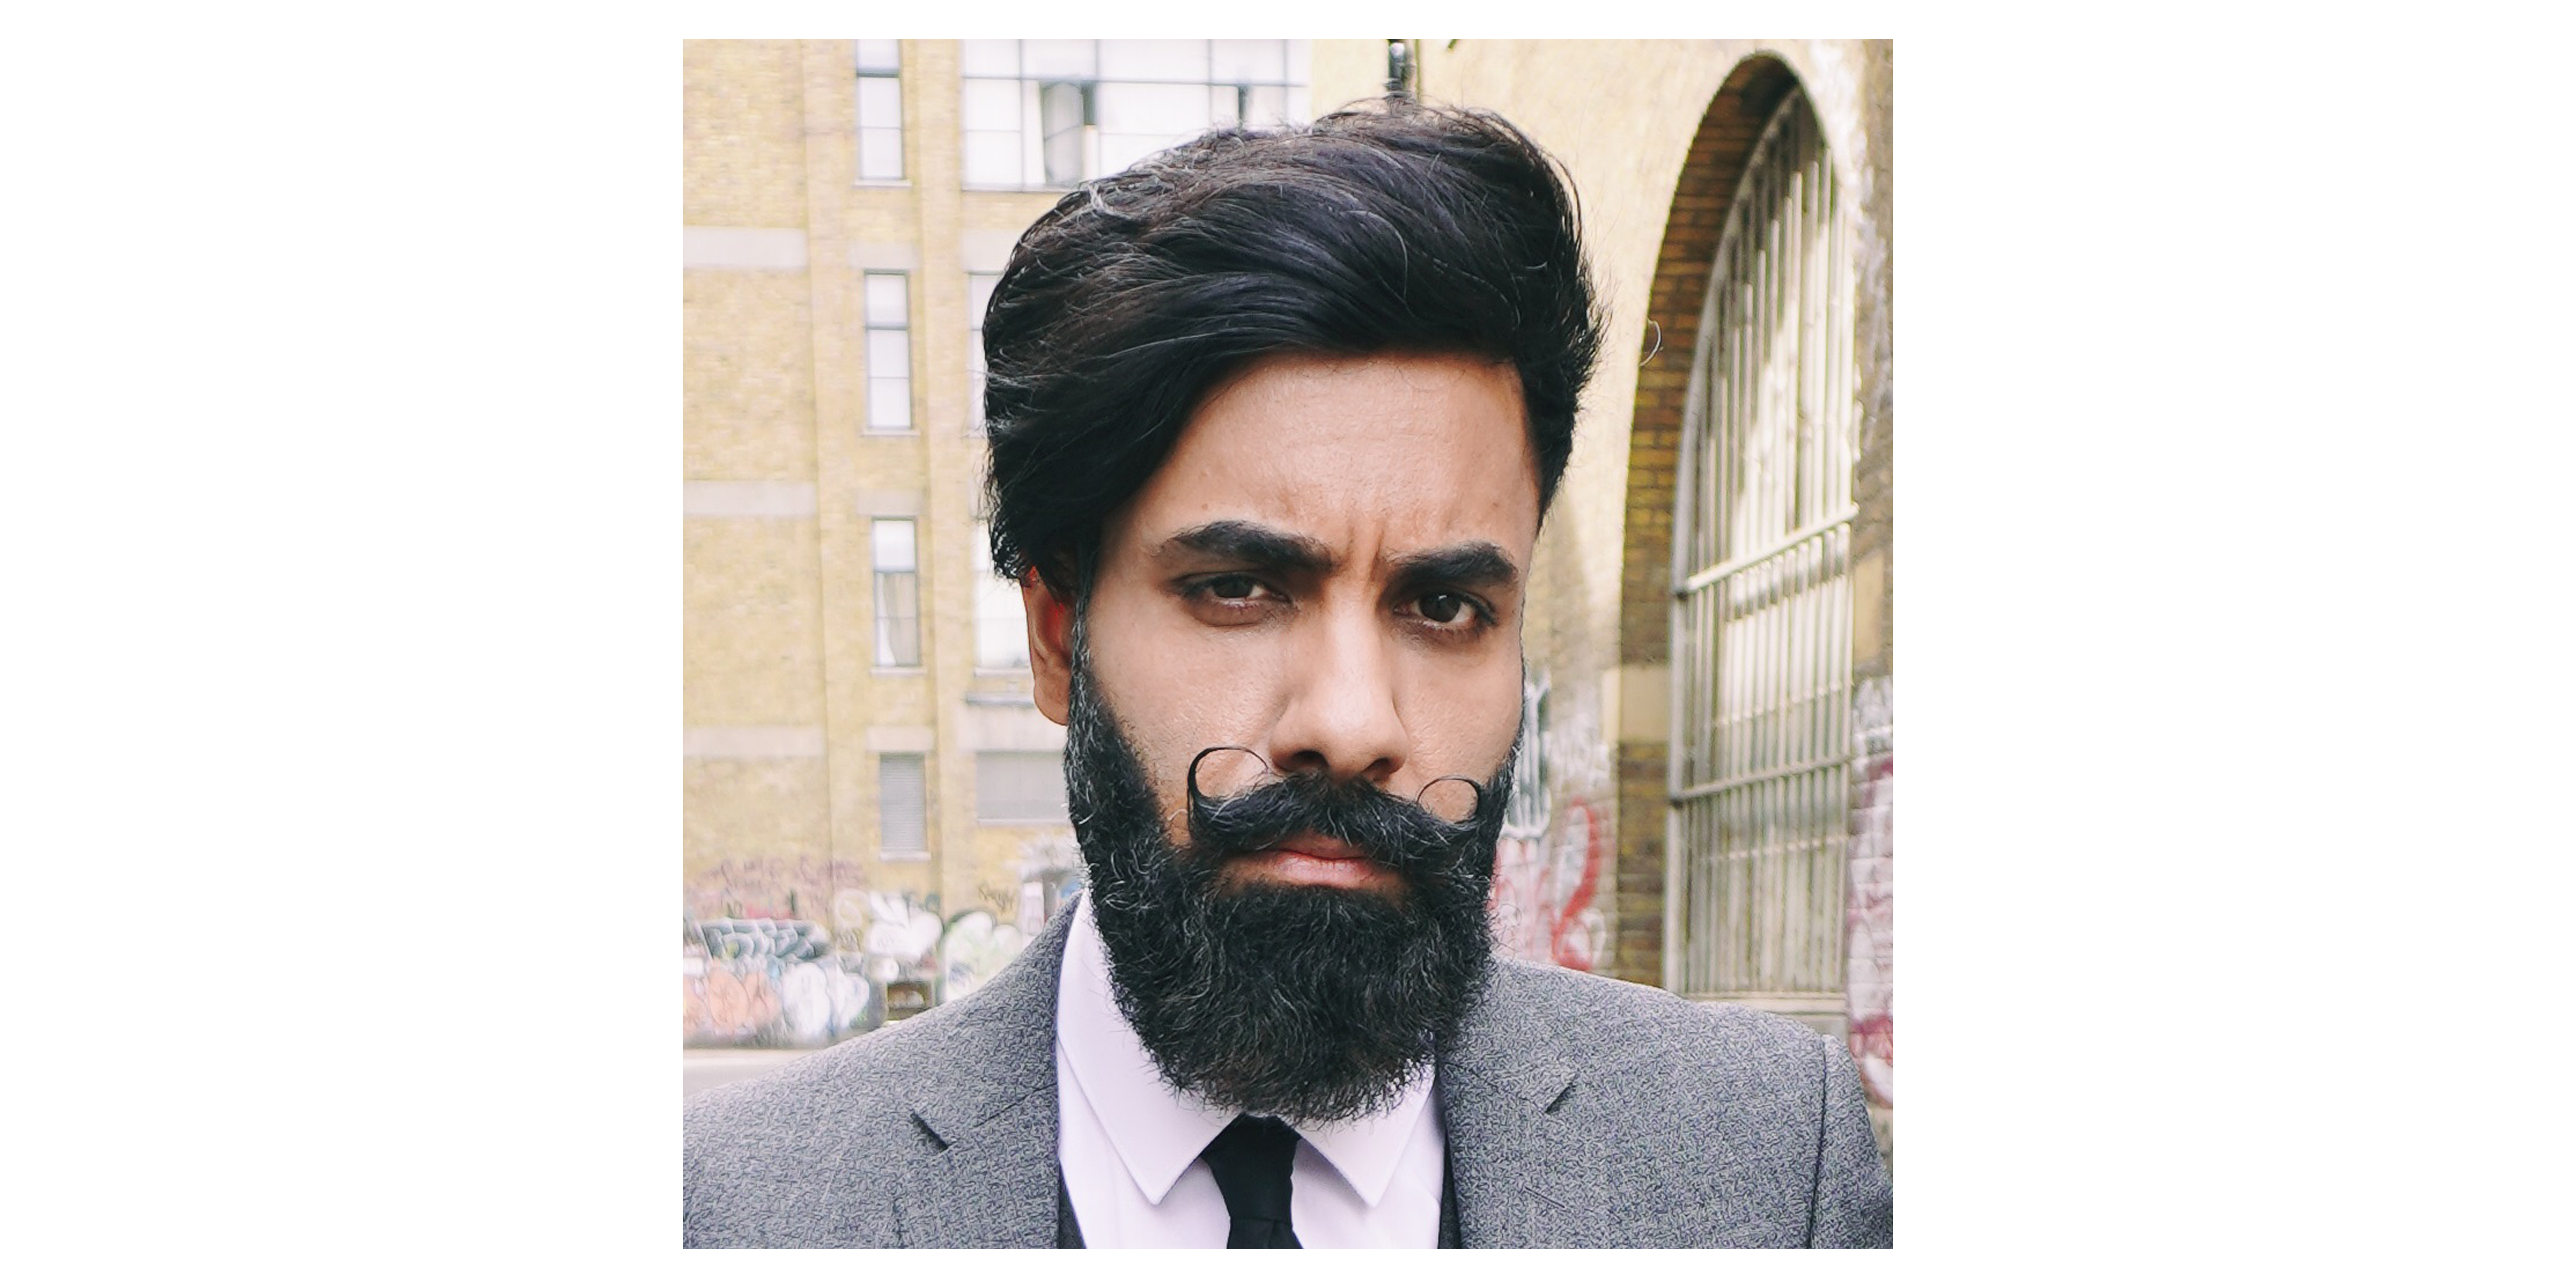 PAUL CHOWDHRY TO RECORD STAND-UP SPECIAL AT HACKNEY EMPIRE